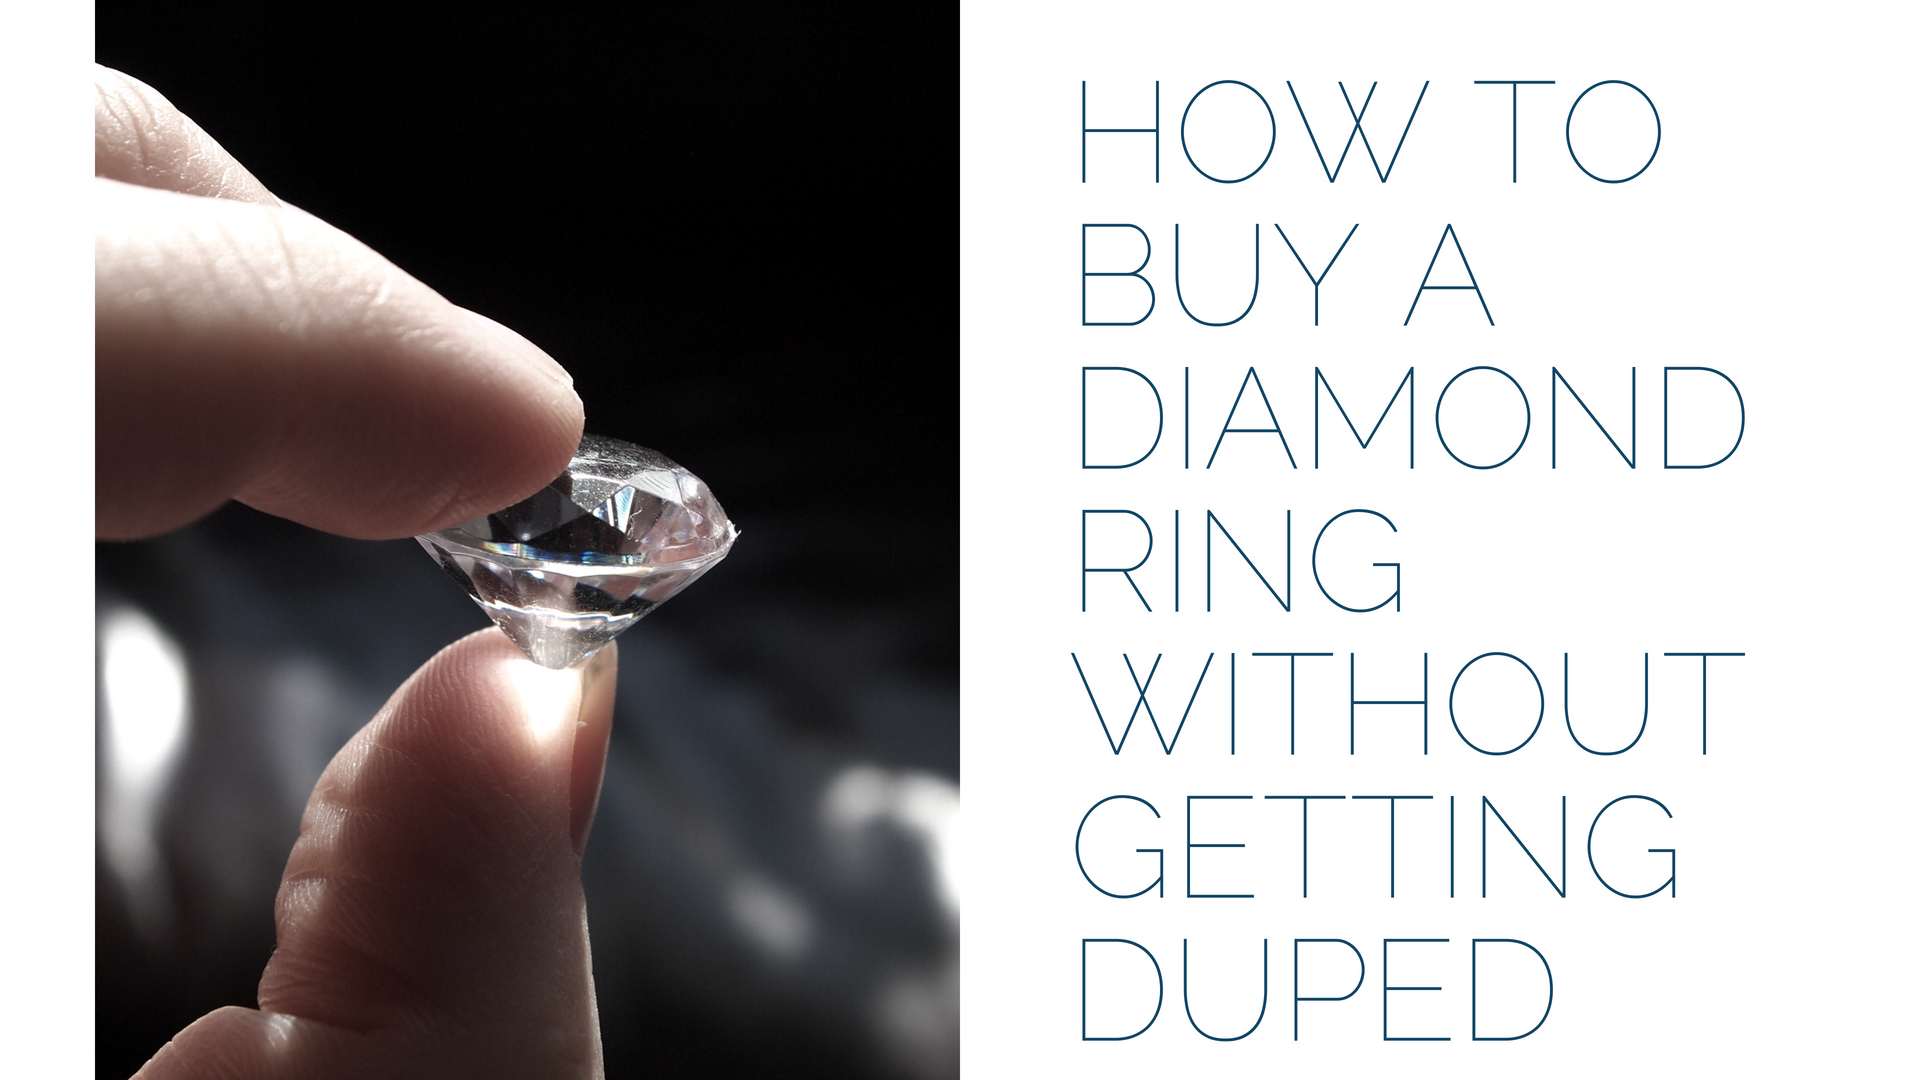 How to Buy a Diamond Ring without getting duped